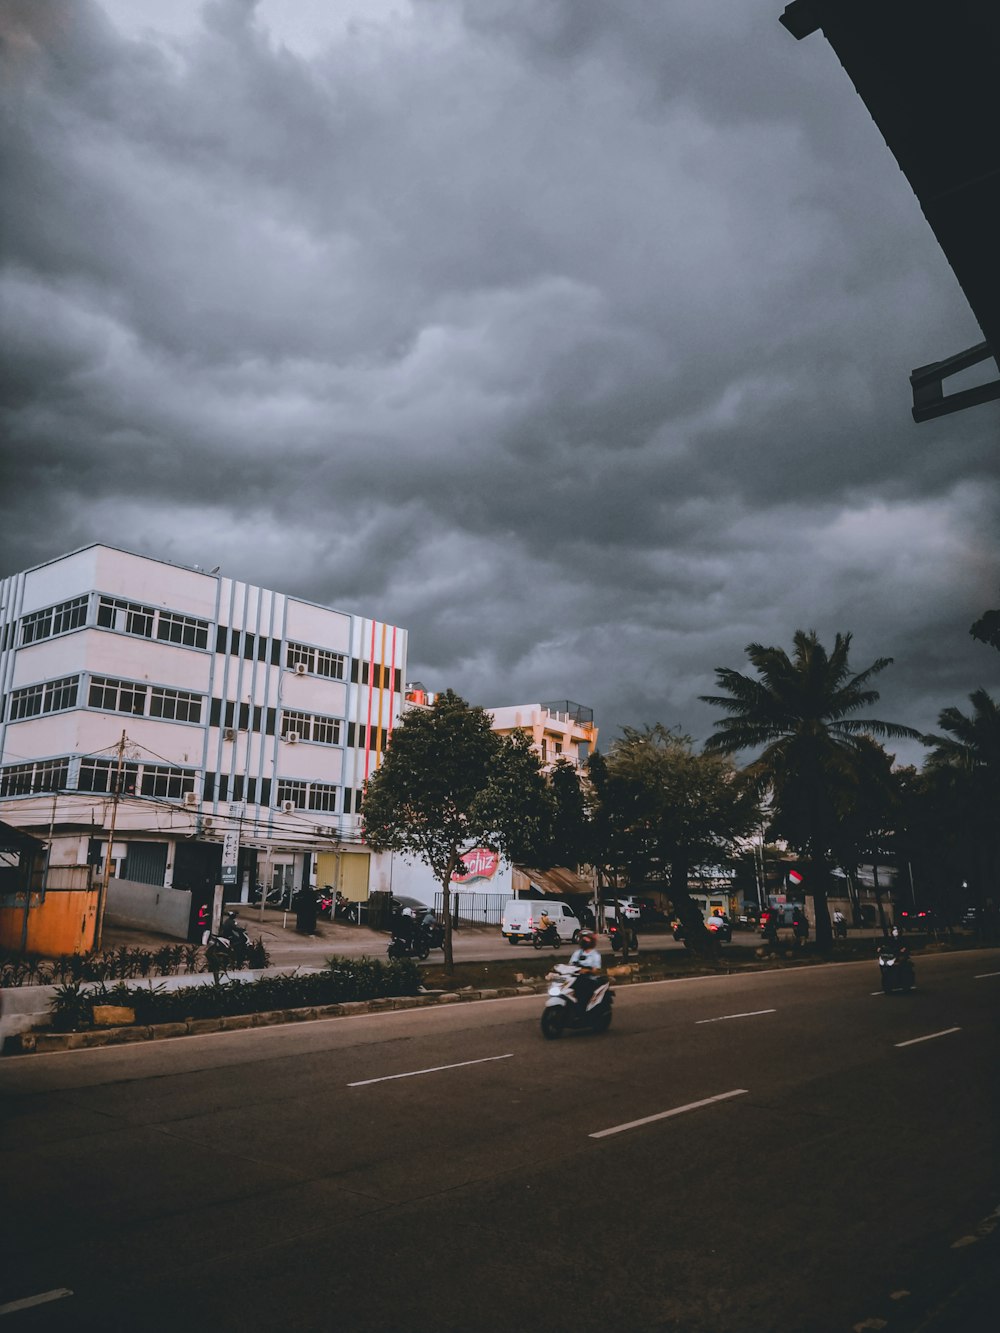 a person riding a motorcycle down a street under a cloudy sky